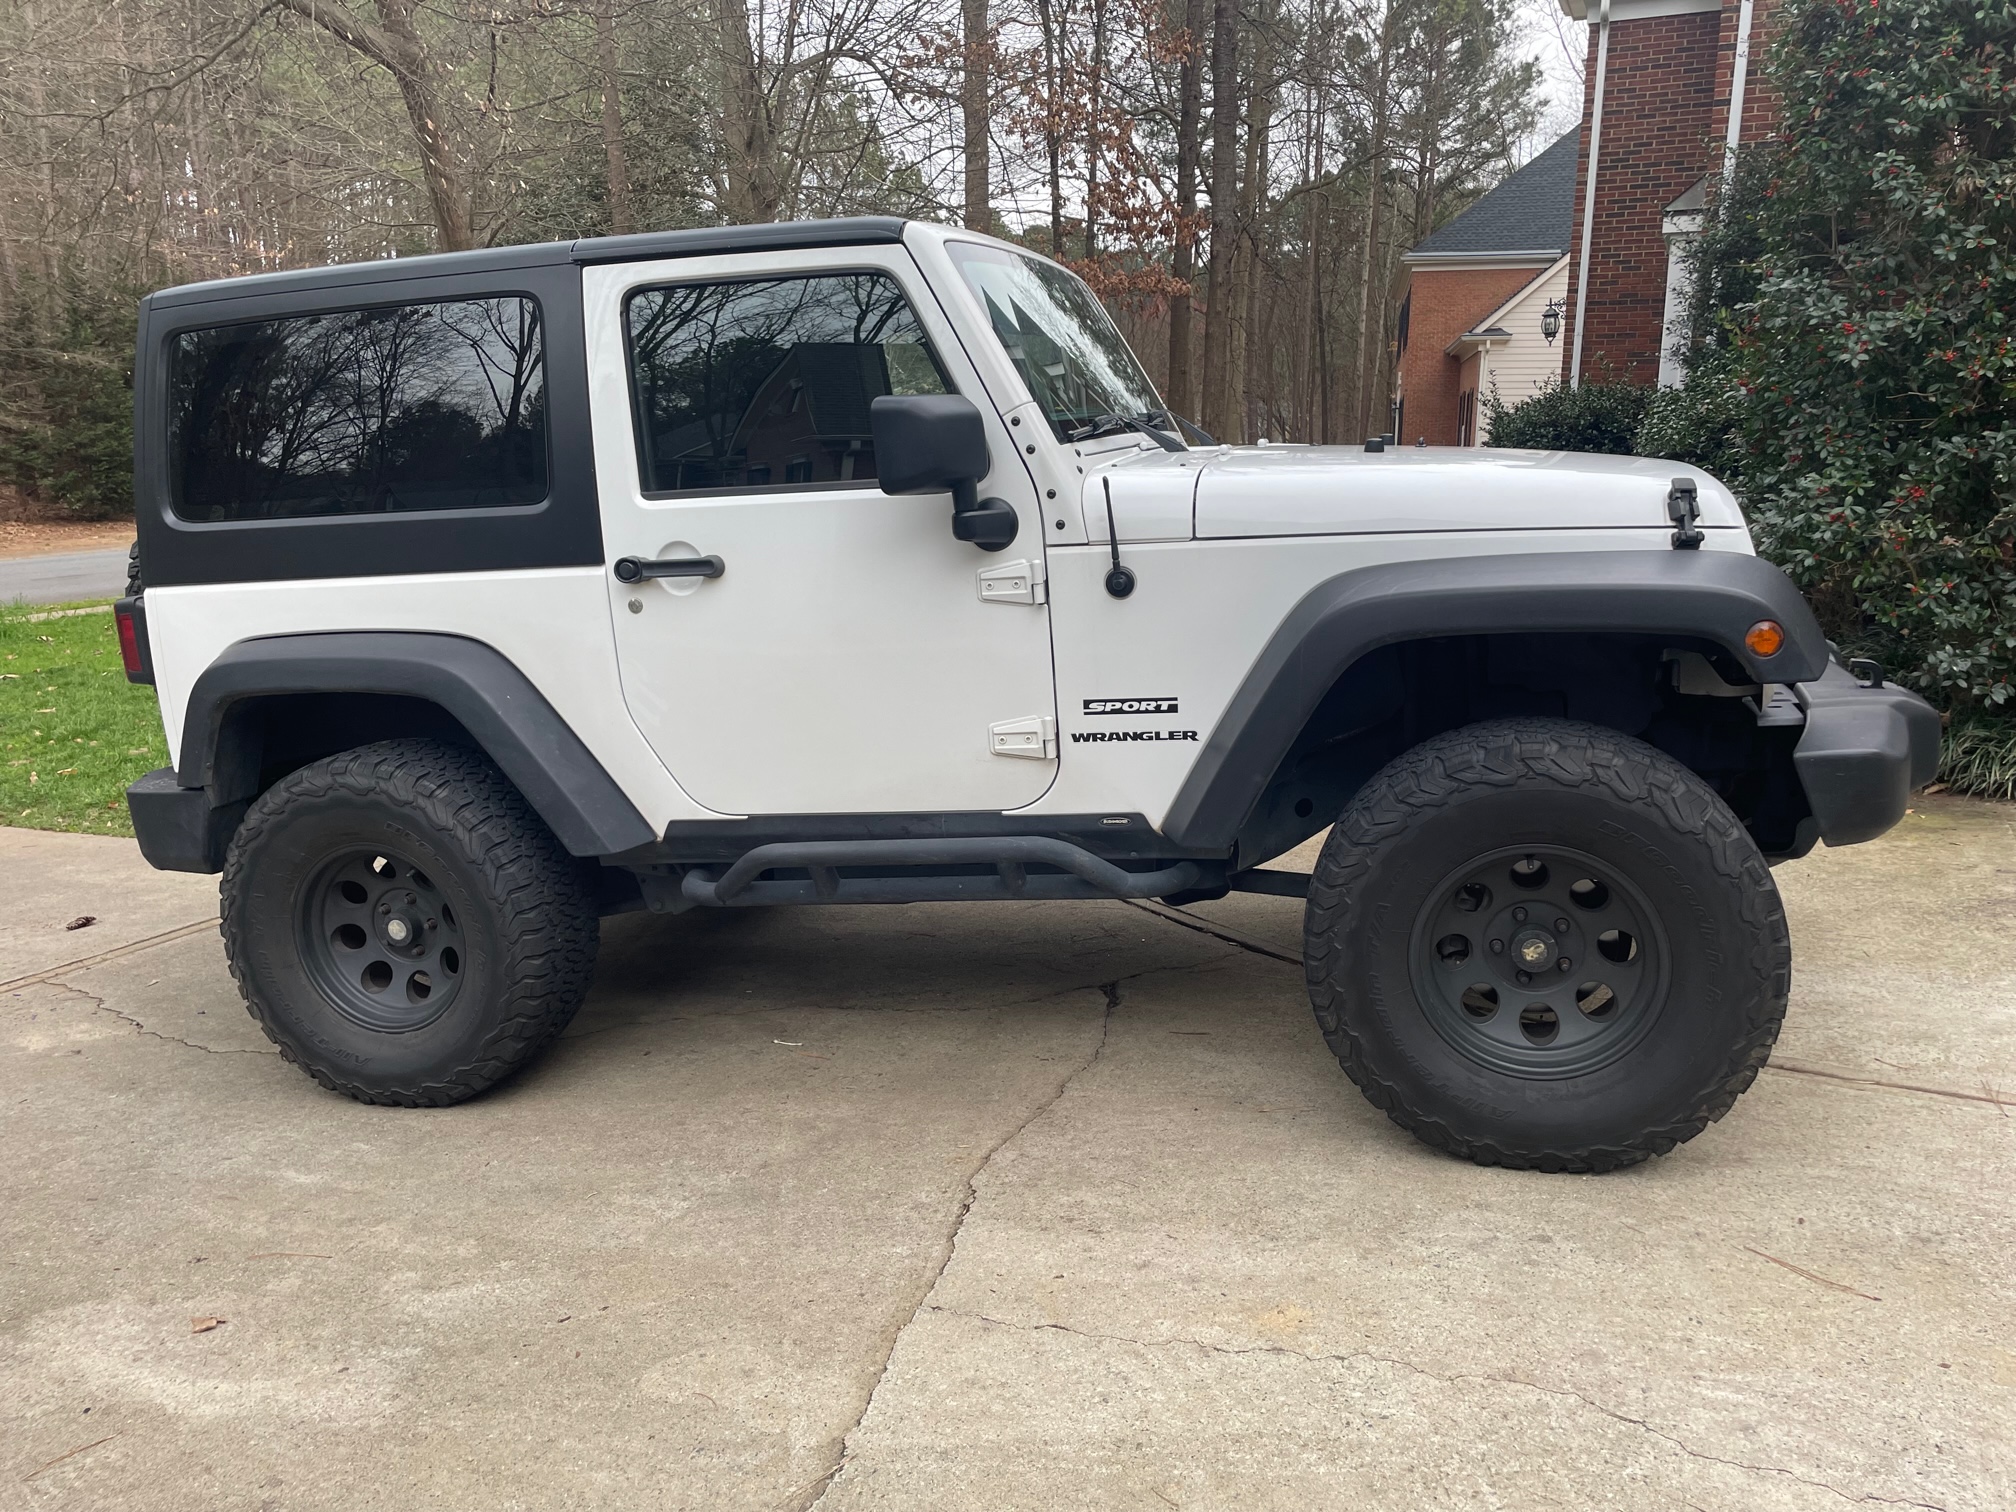 Used Jeep Wrangler for Sale in Charlotte, NC 